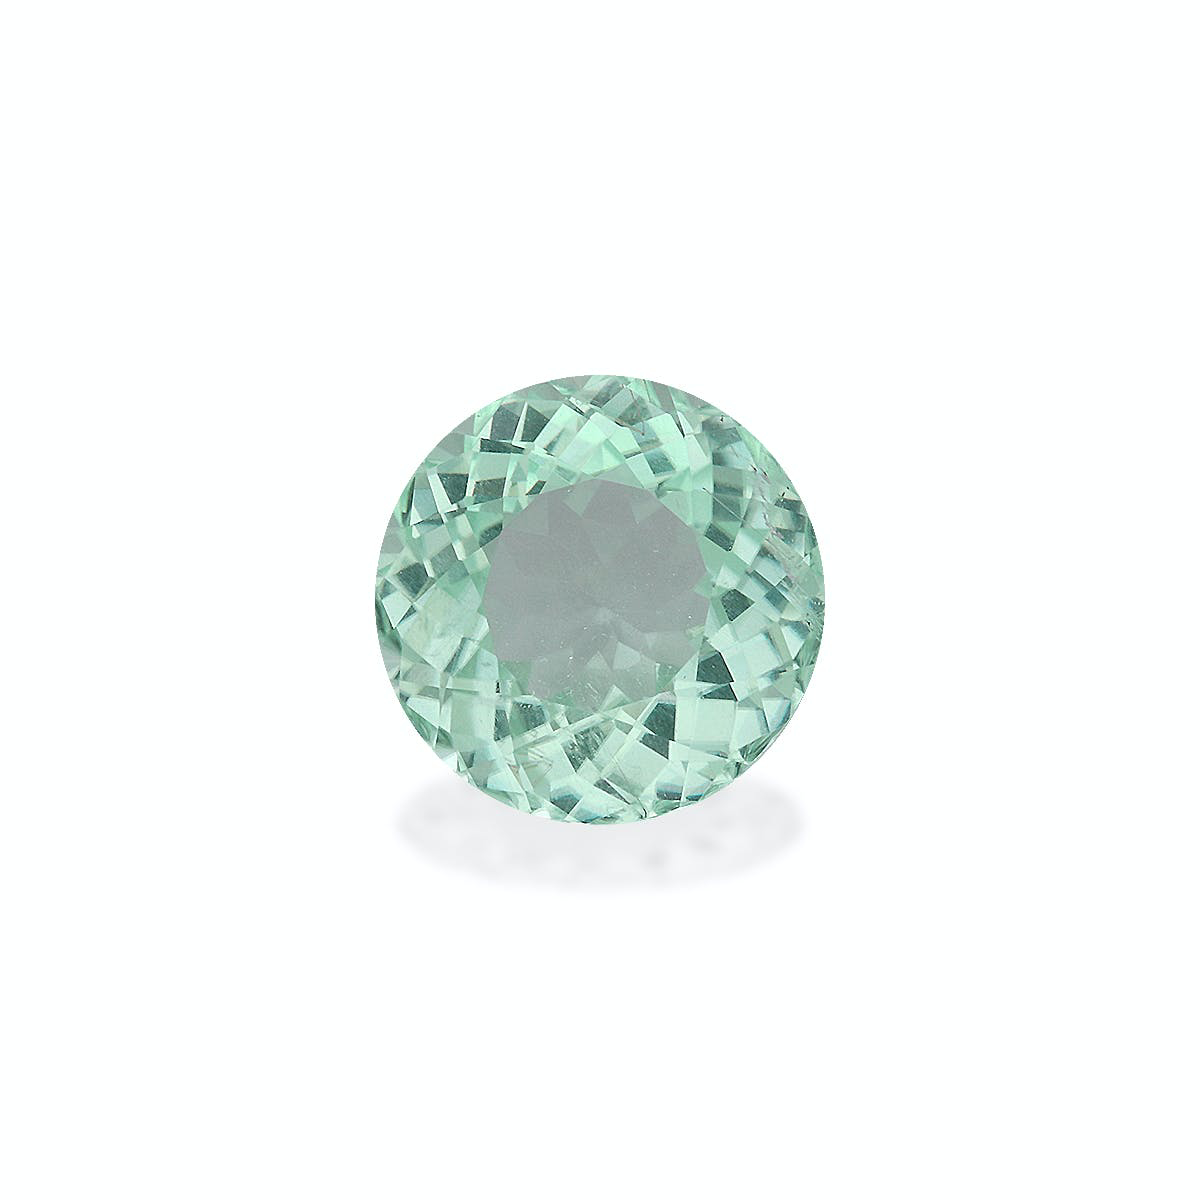 Picture of Mist Green Paraiba Tourmaline 5.42ct - 11mm (PA1243)